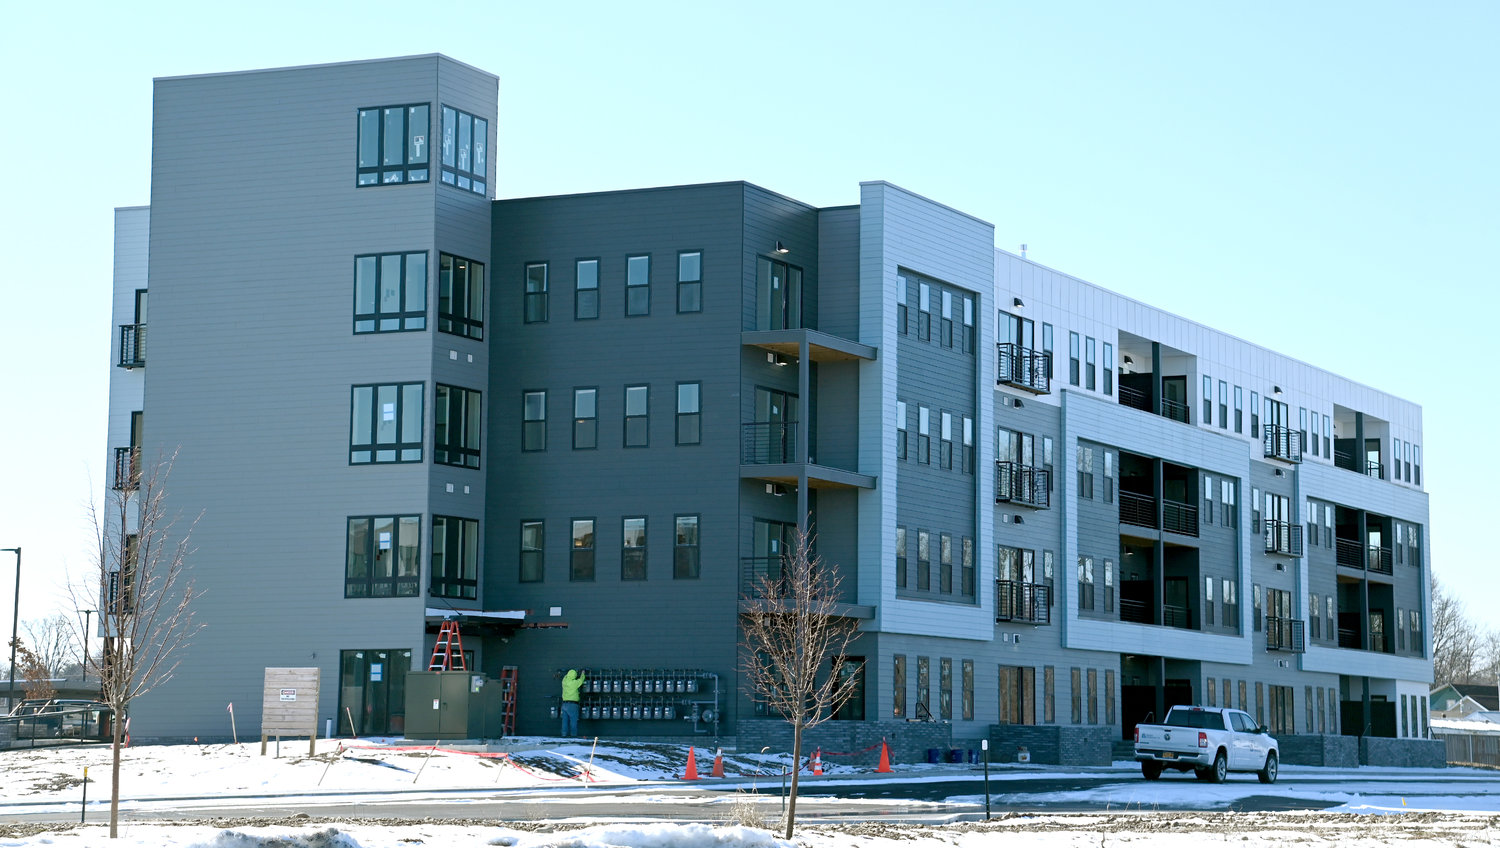 Work continues at Air City Lofts on Feb. 13. Bonacio Construction is the property’s developer.